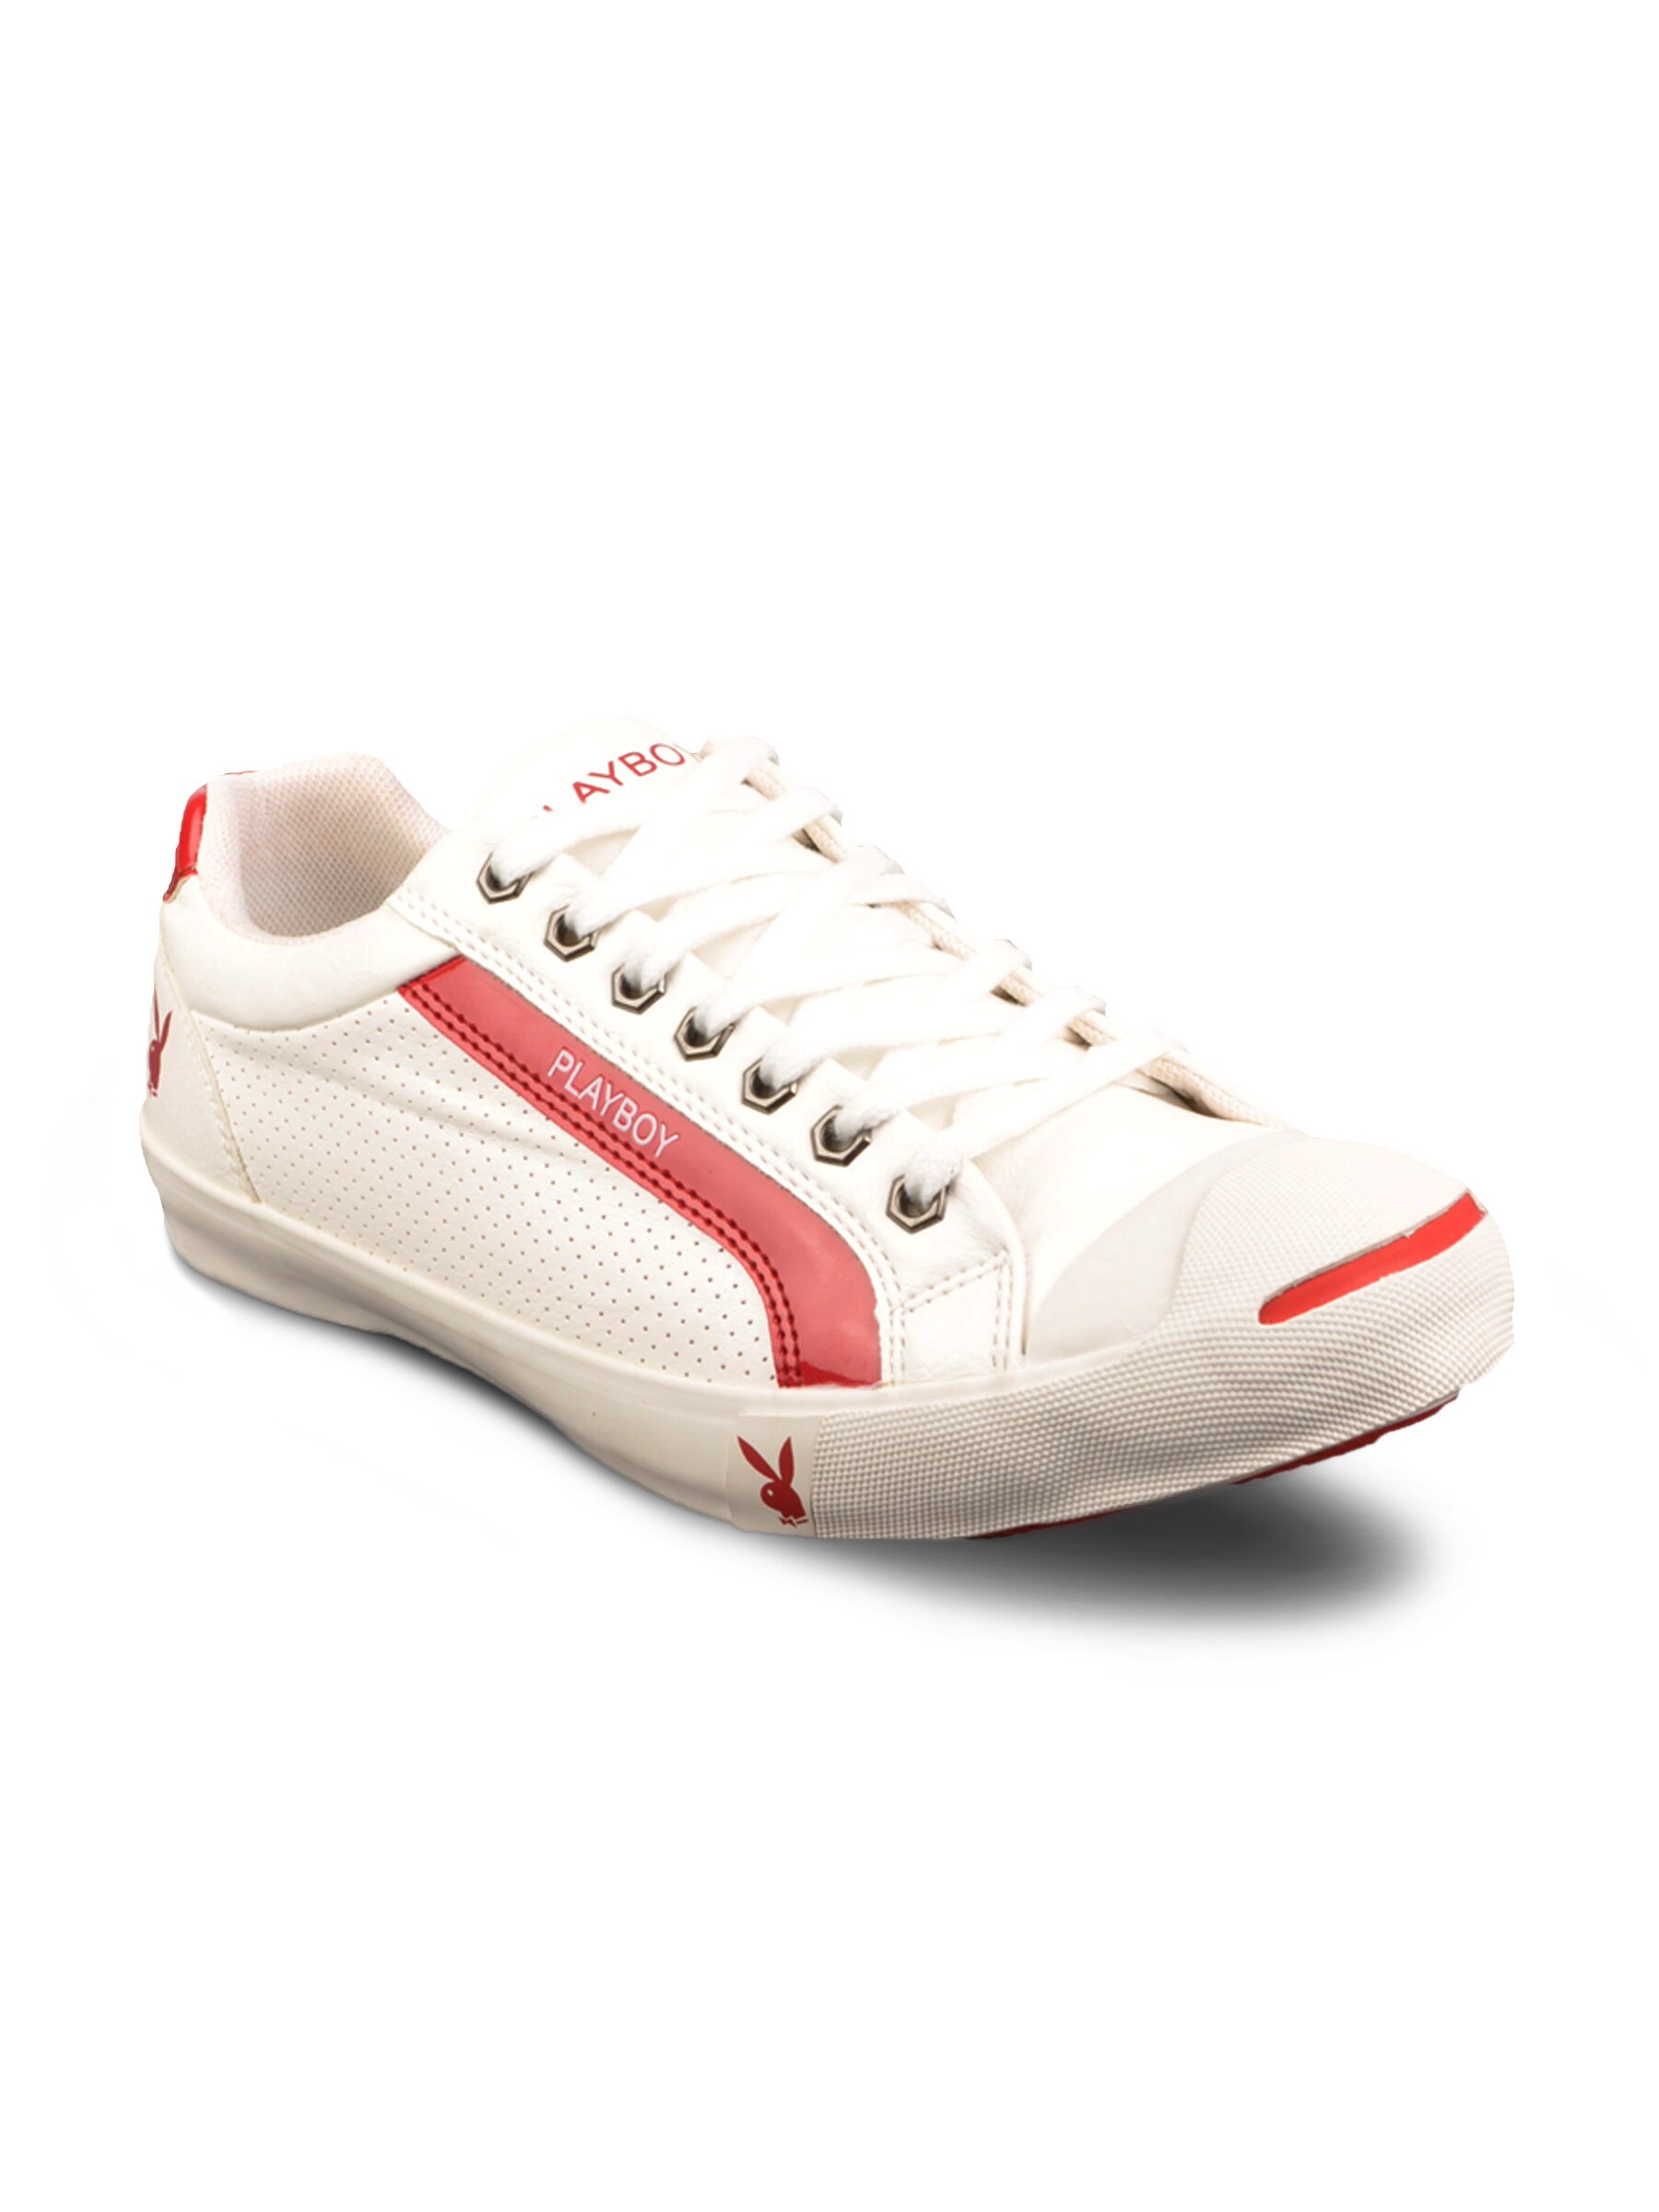 Playboy Men Casual White Casual Shoes